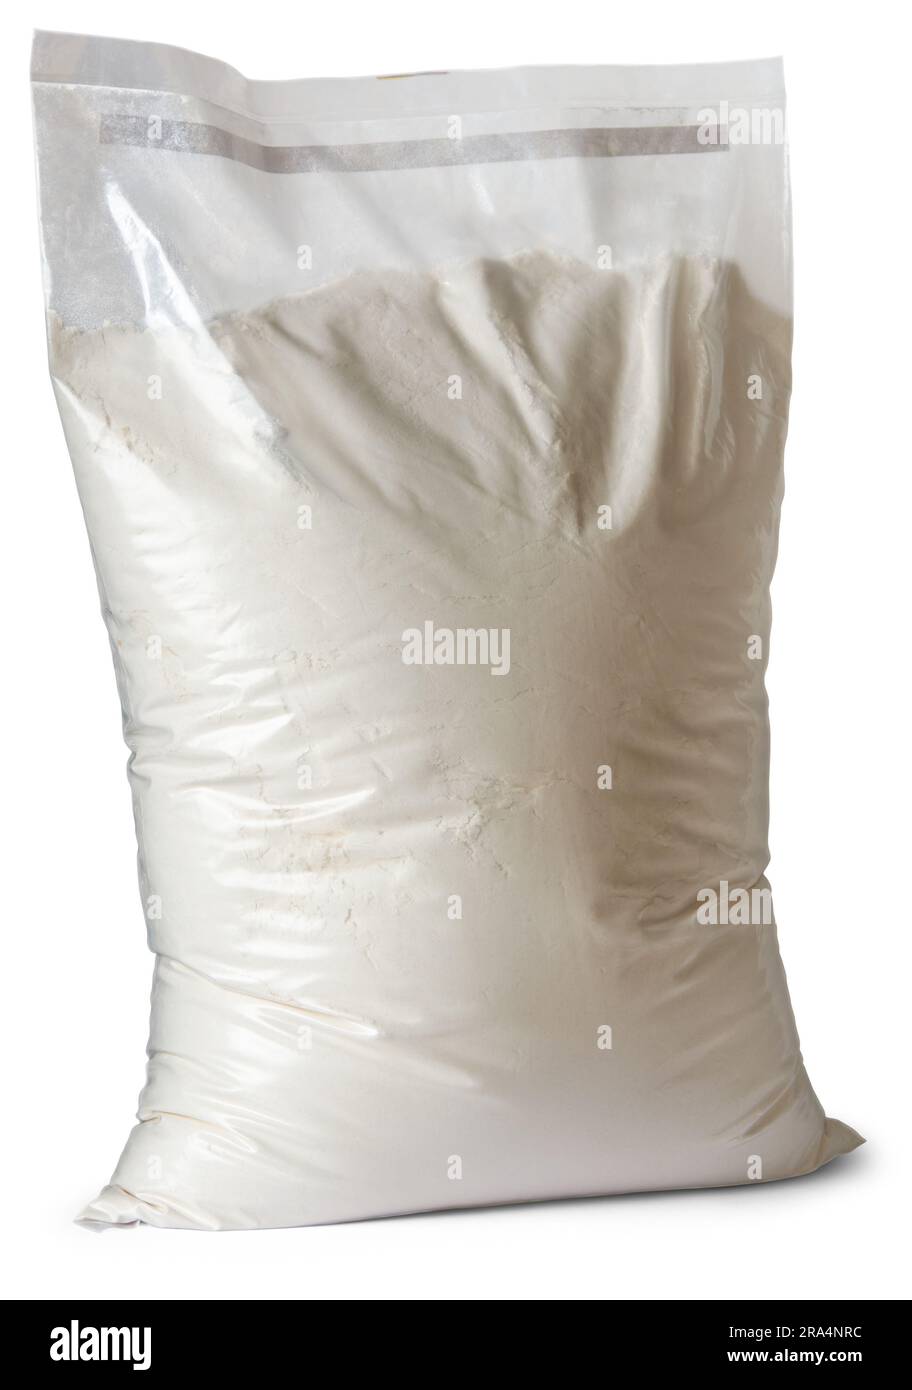 transparent plastic bag of flour, side view isolated on white background, blank package mockup template of ingredient for cooking or baking Stock Photo